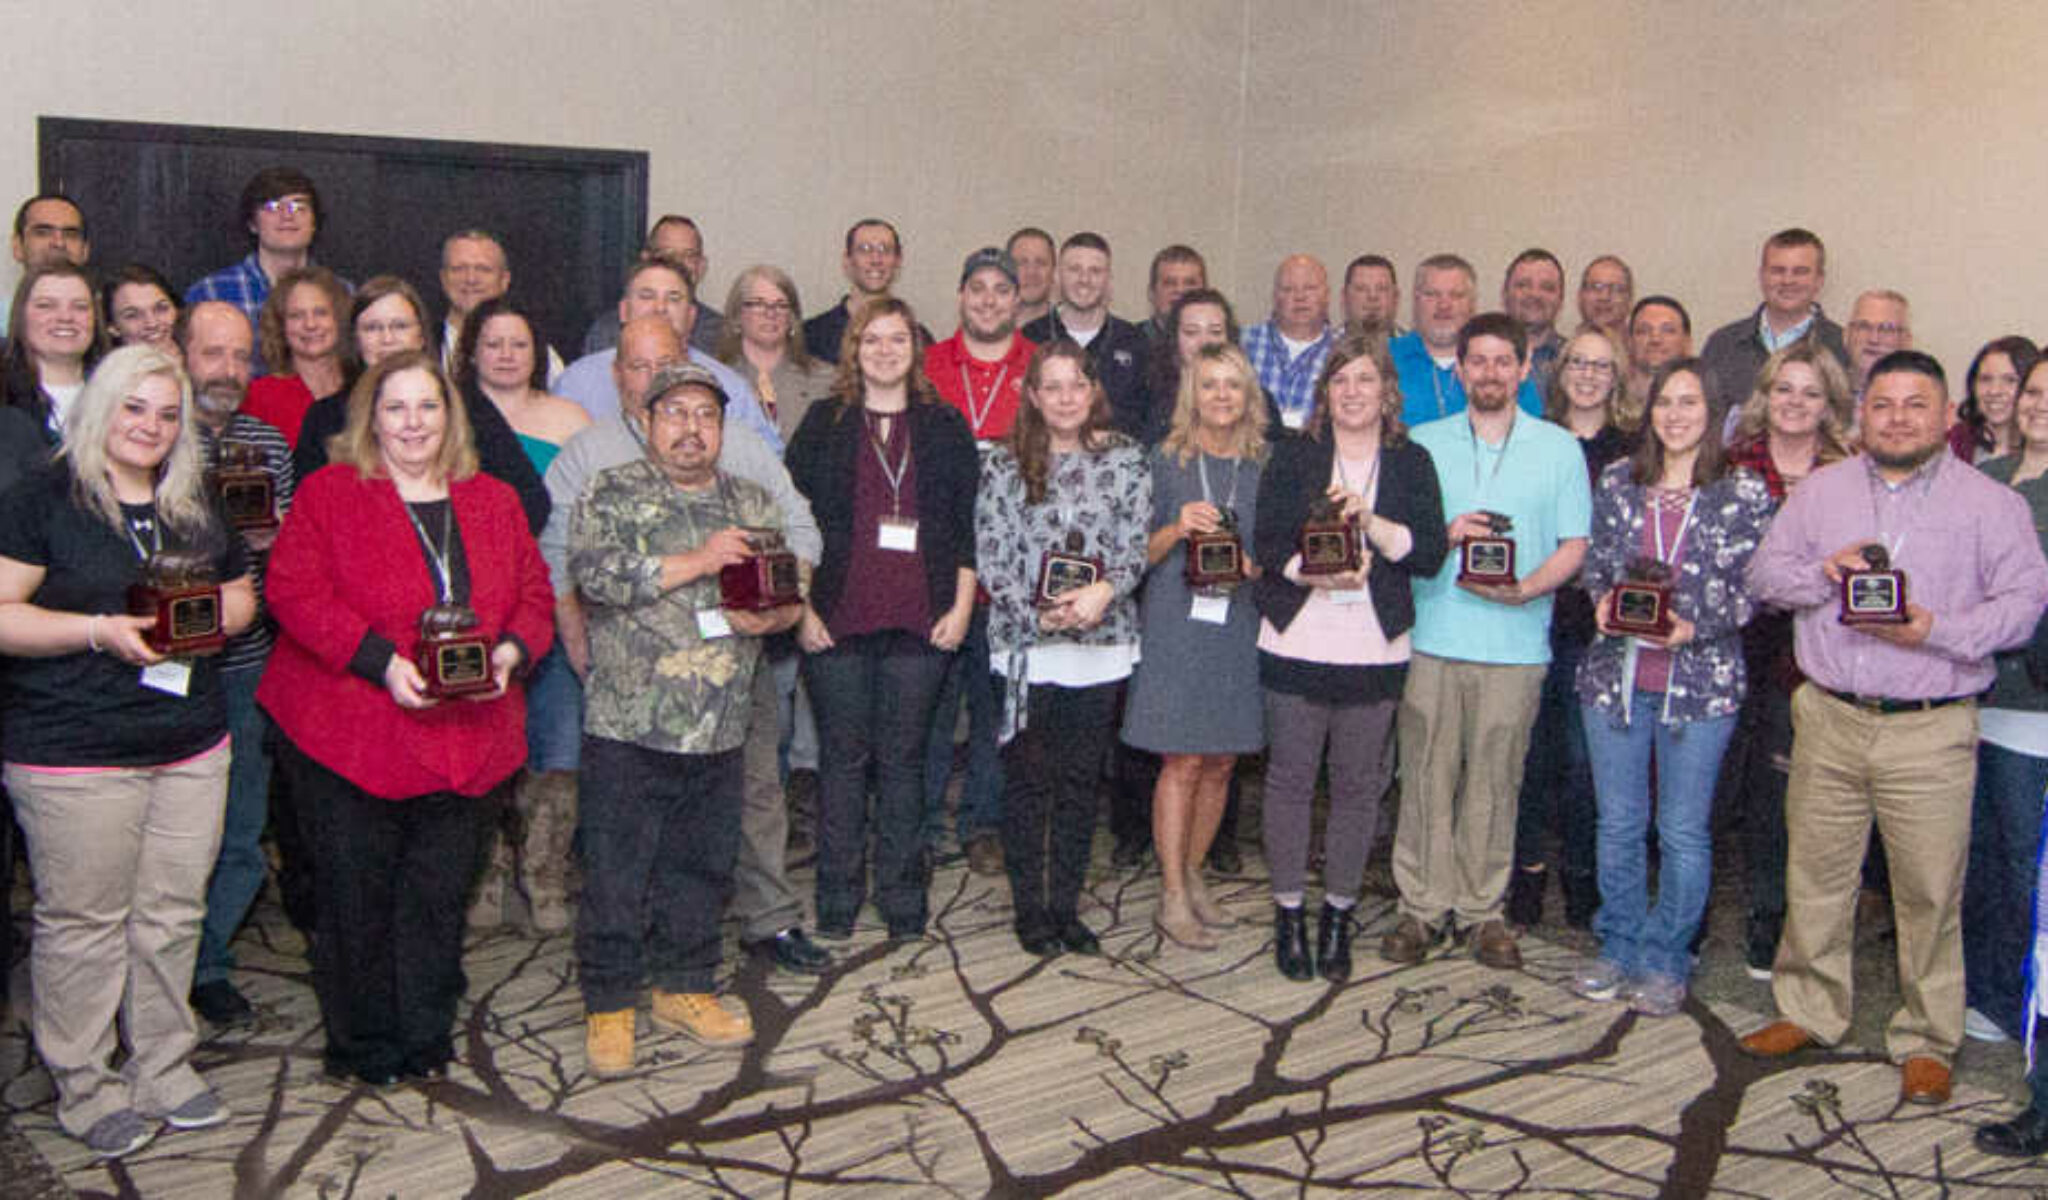 Christensen Farms hosts its 5th annual organizational awards event